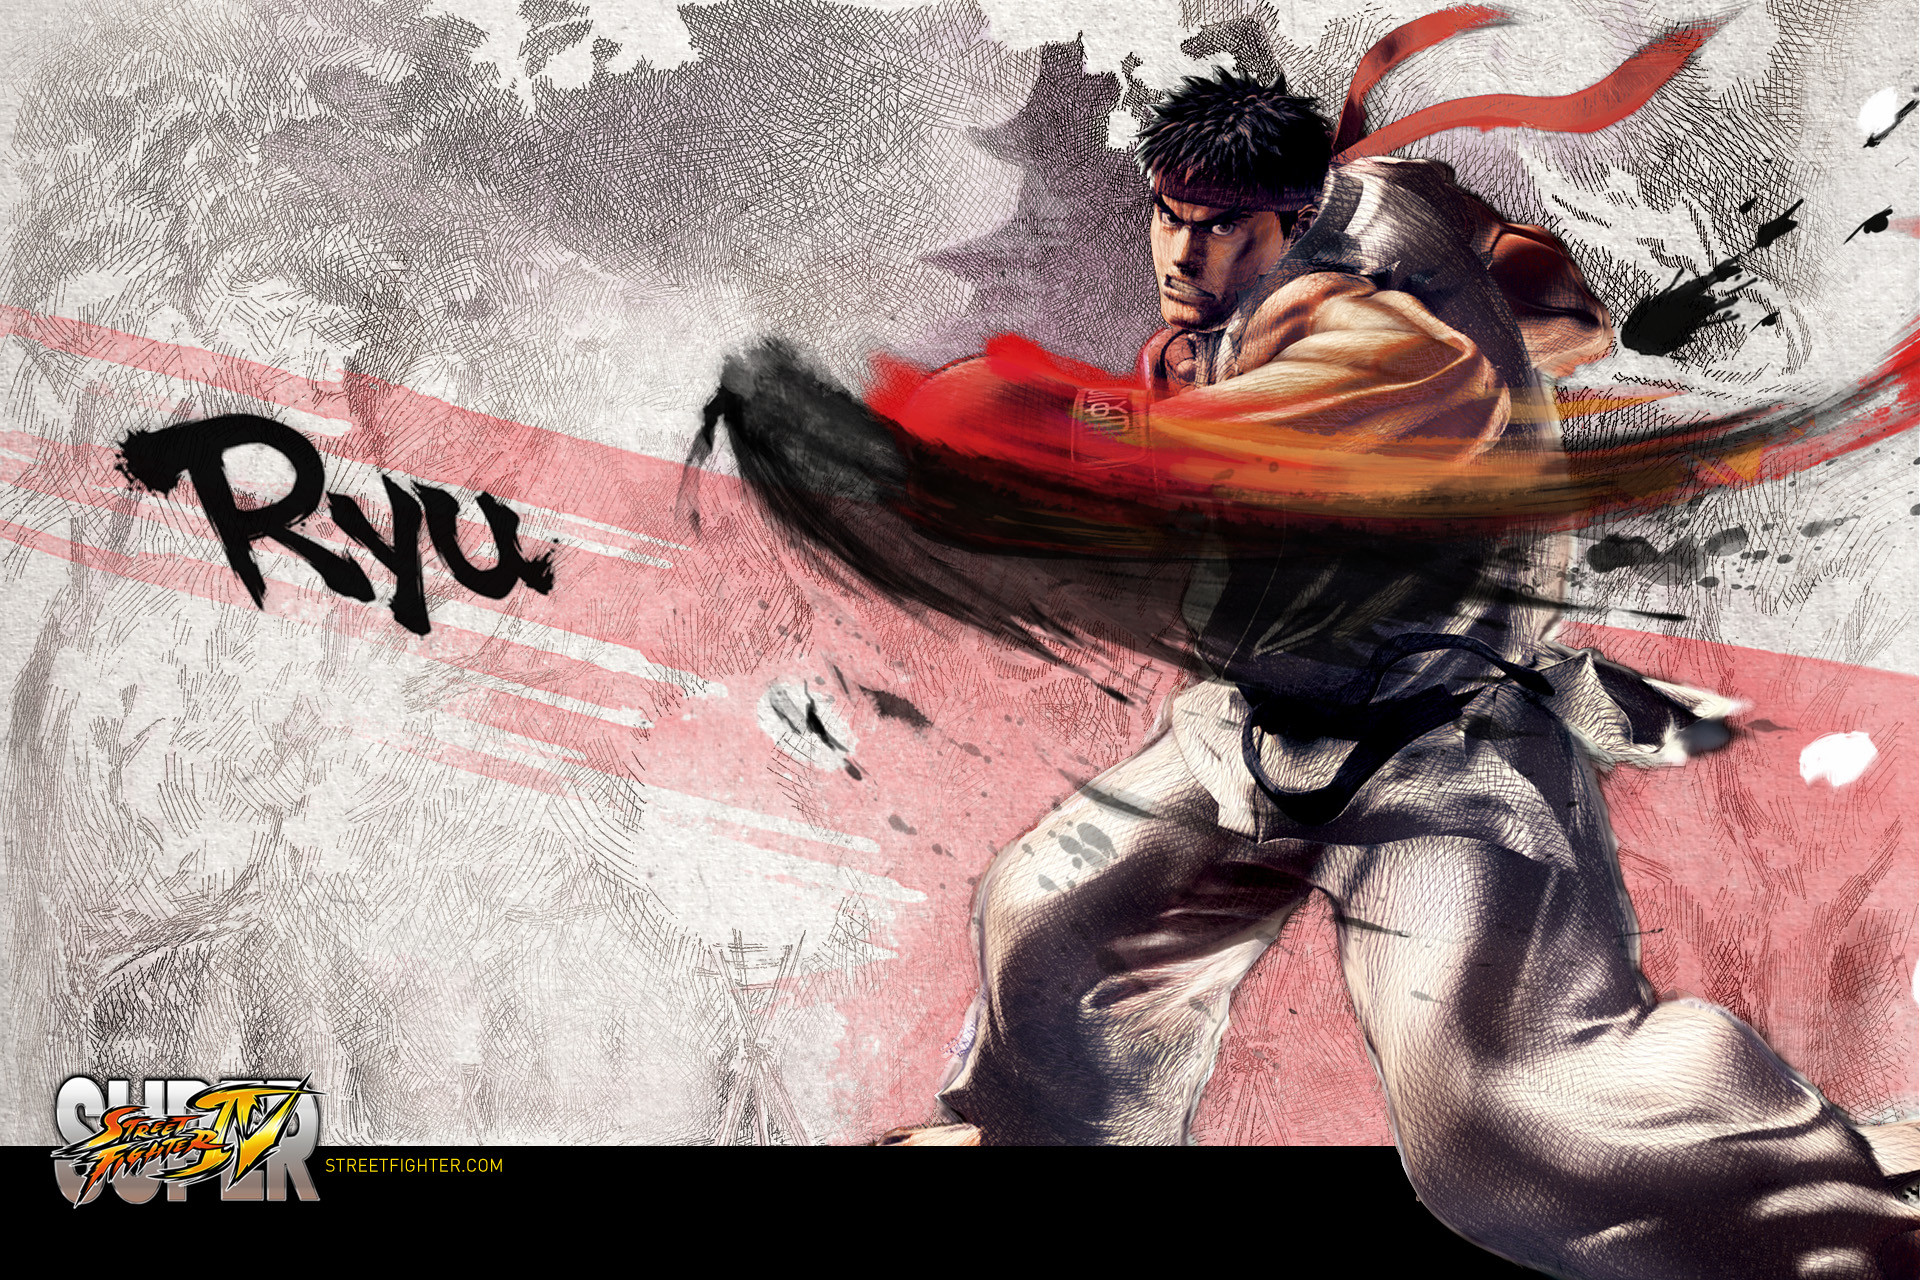 1920x1280 18 Super Street Fighter IV HD Wallpapers | Backgrounds - Wallpaper Abyss